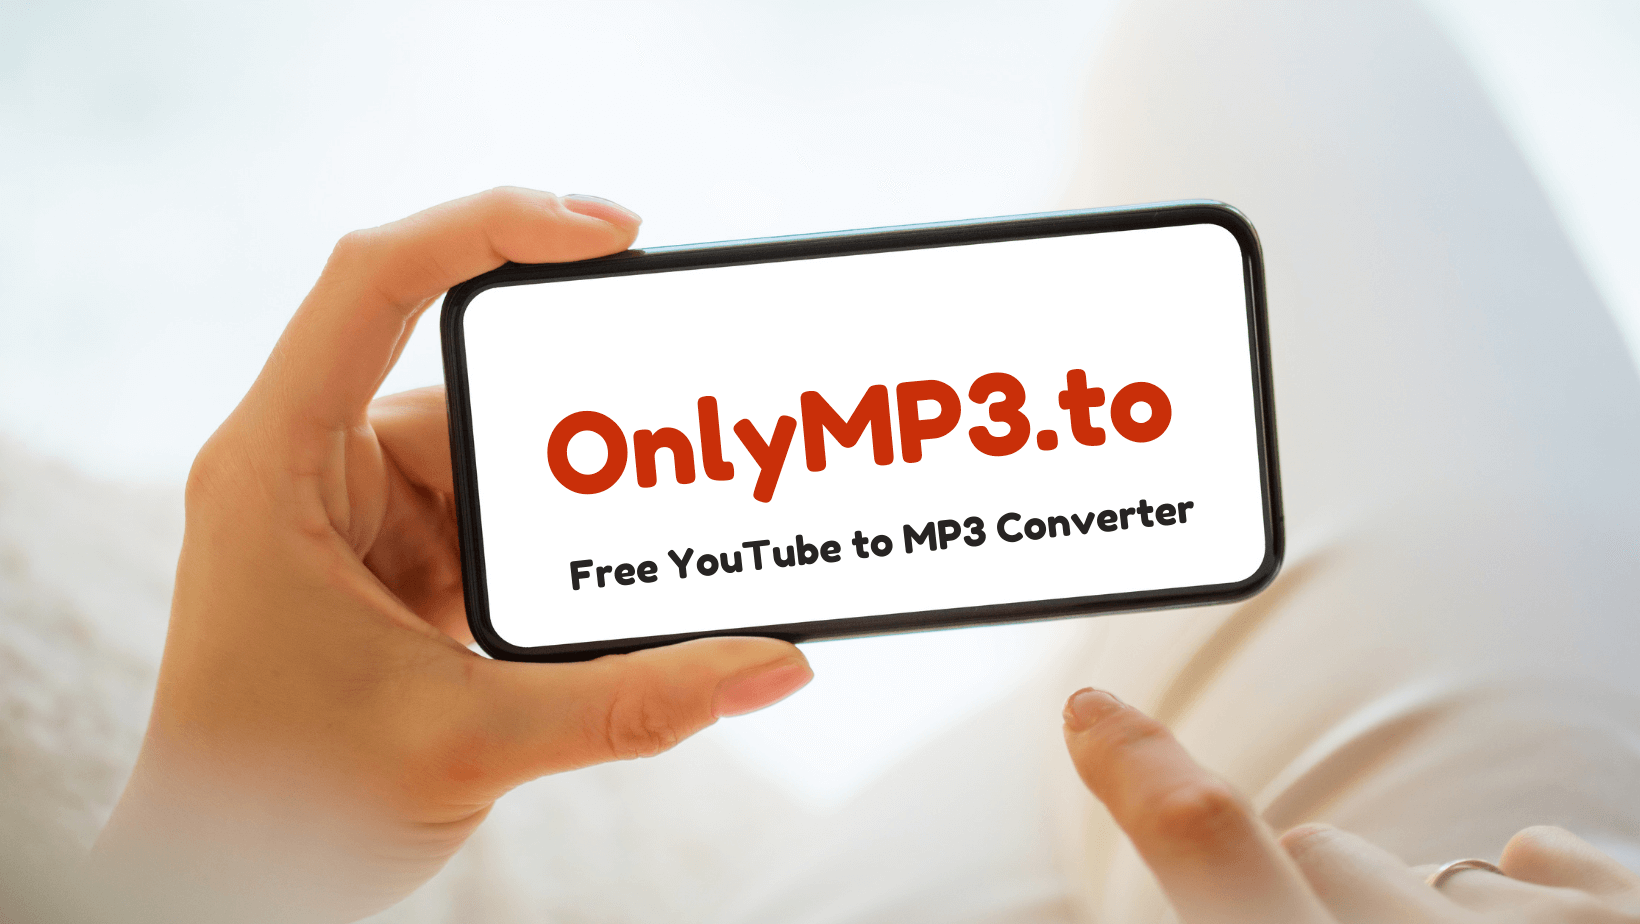 OnlyMP3.to Landing page